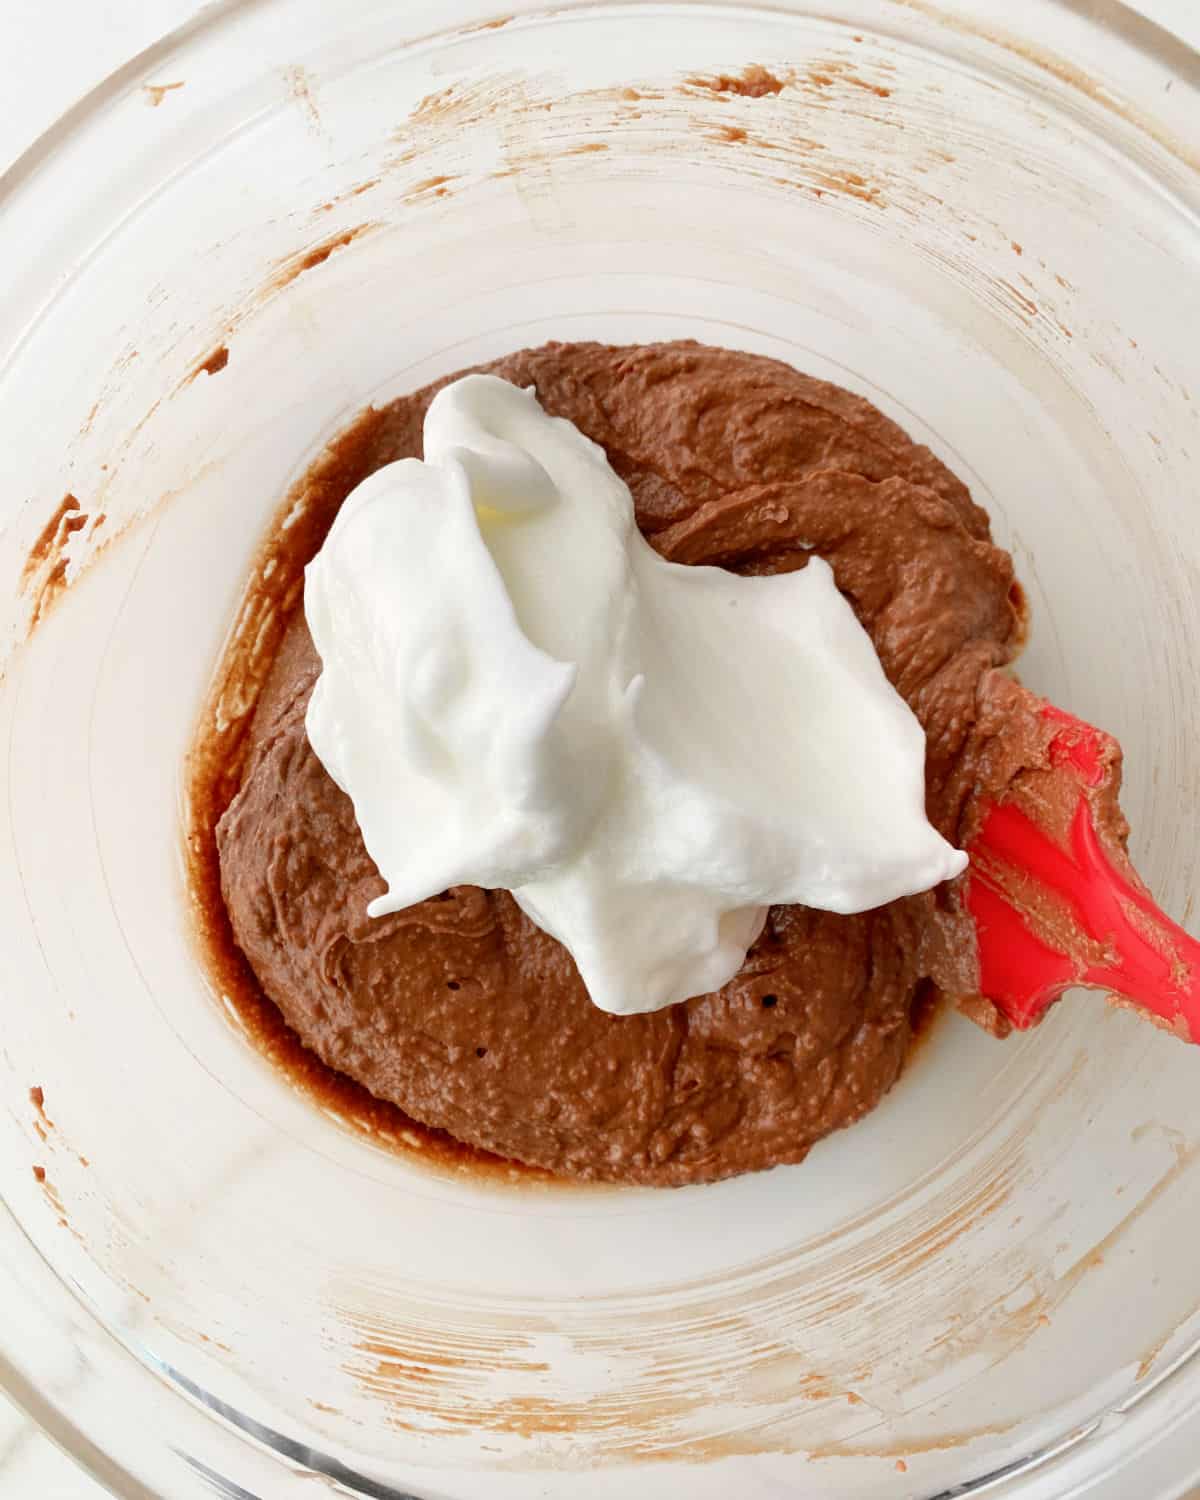 Mound of beaten egg whites added to chocolate cake batter in a glass bowl with a red spatula.